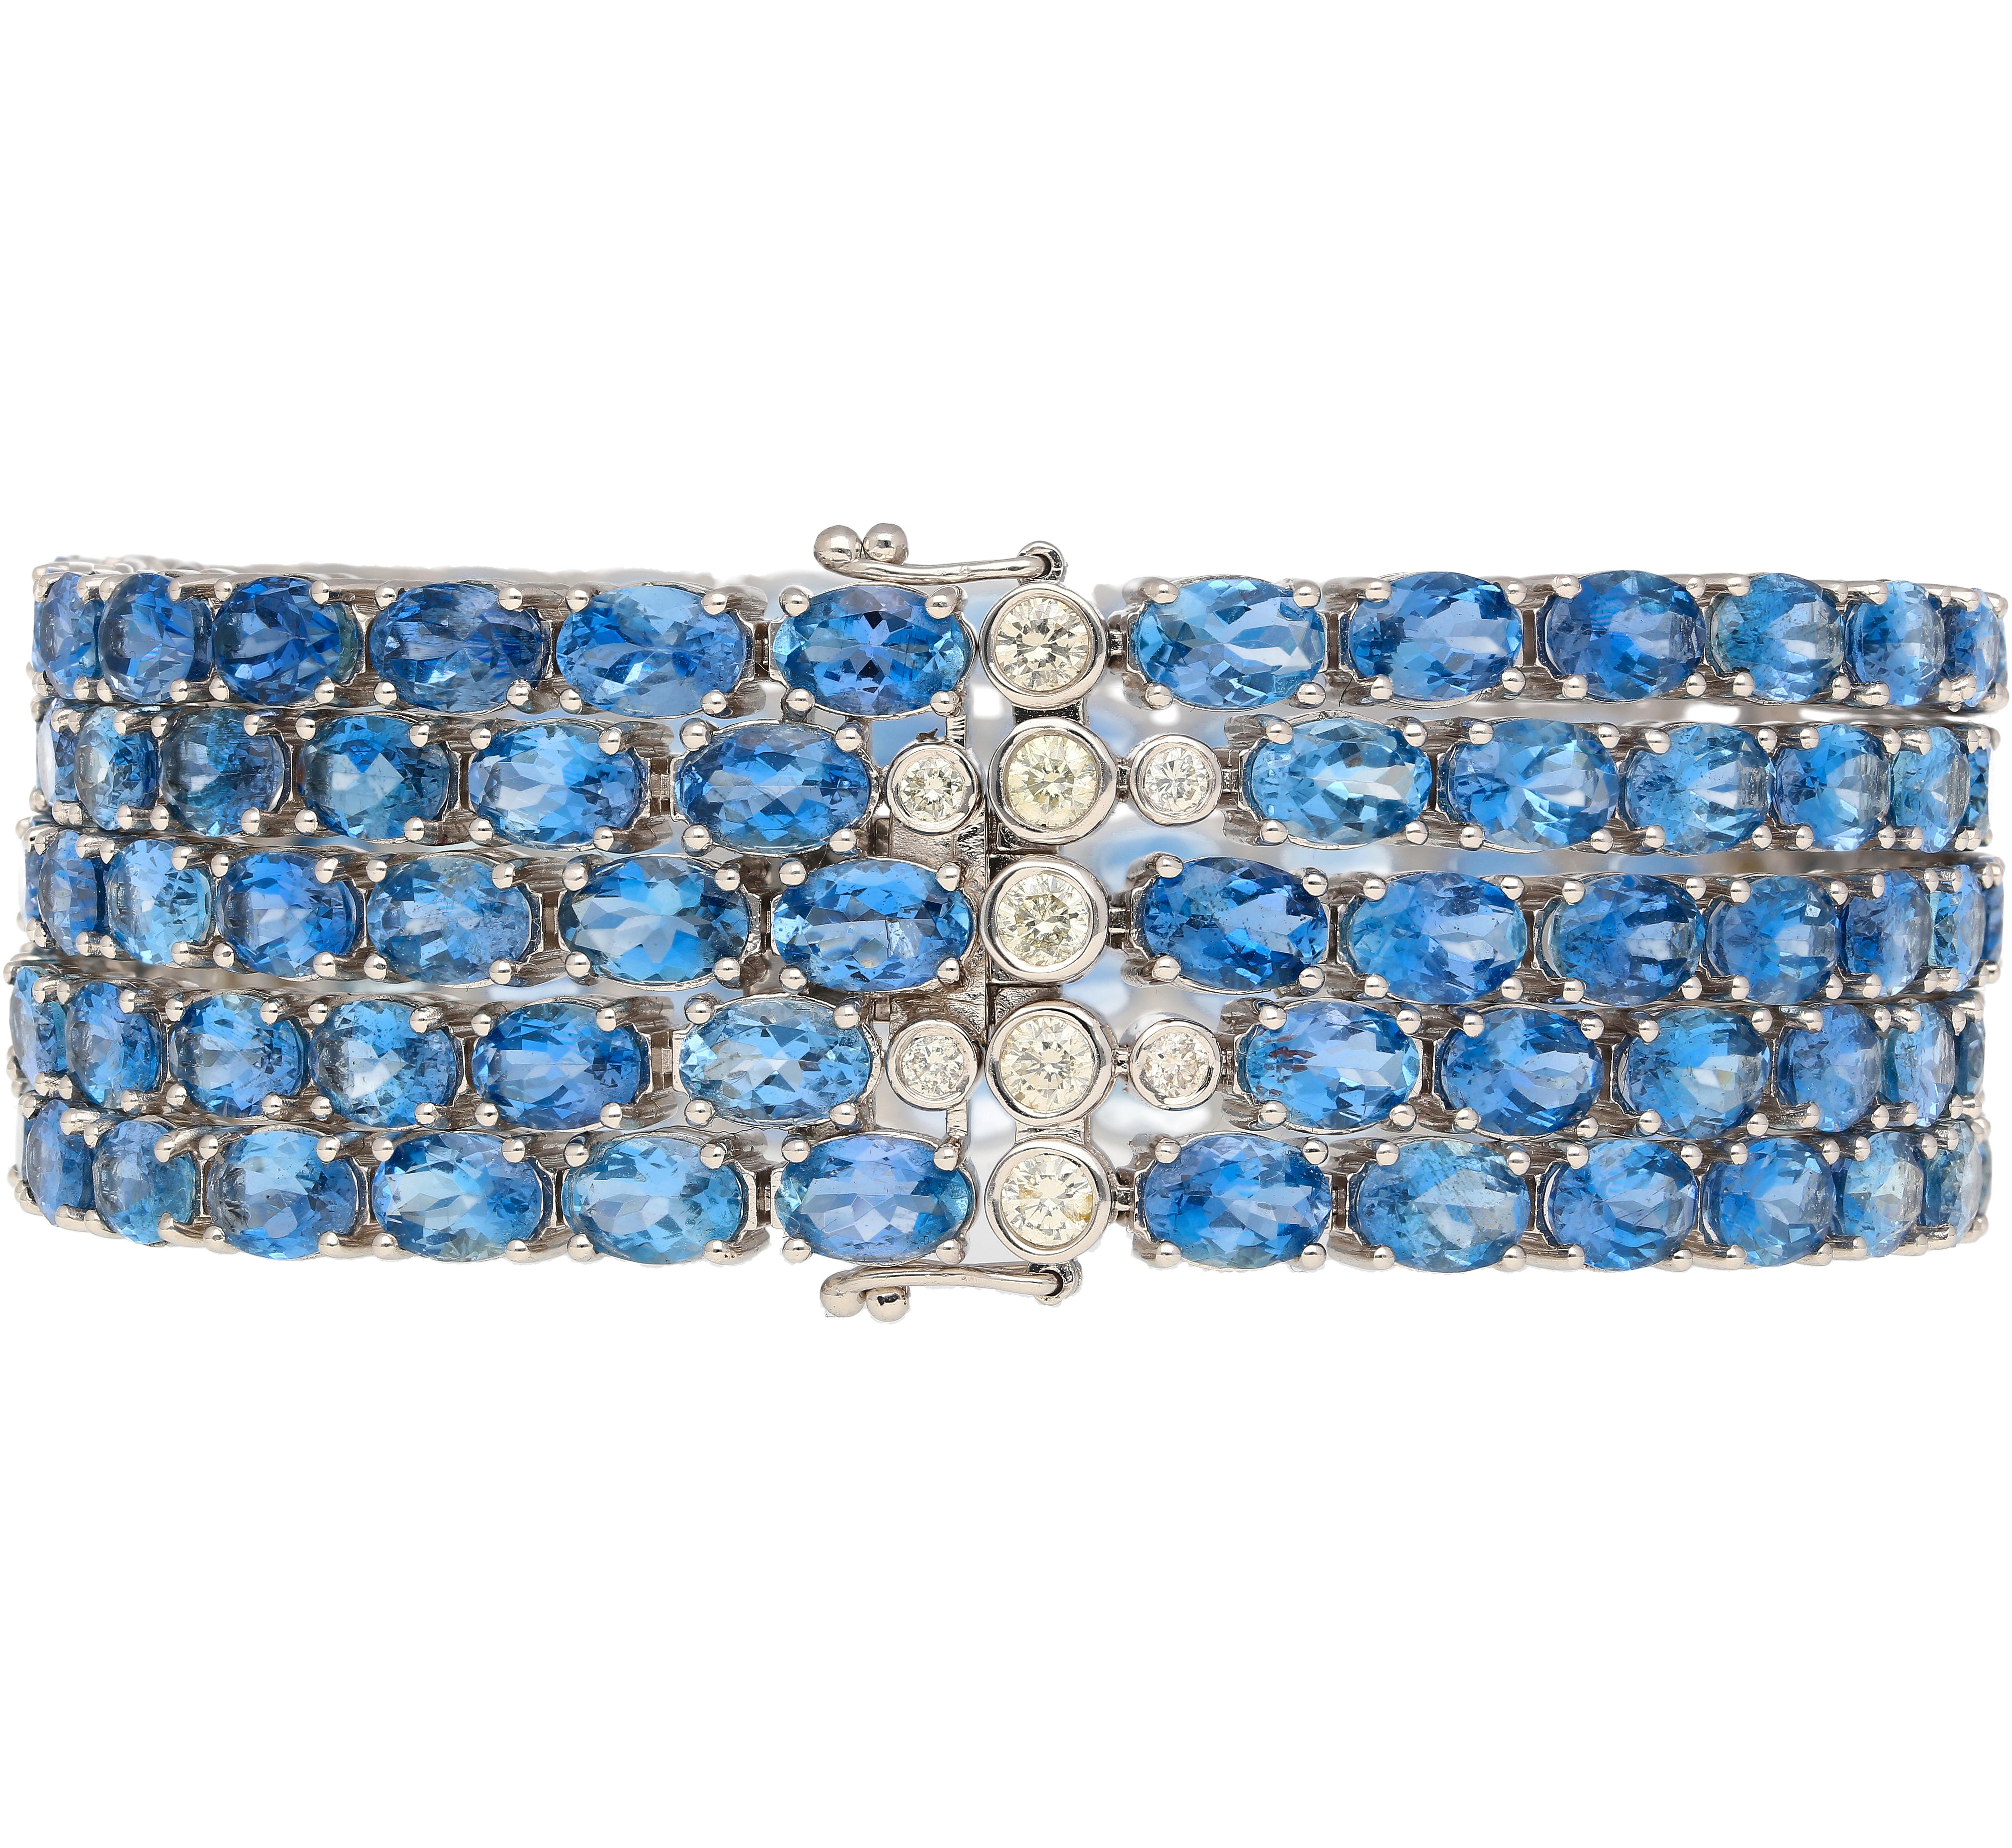 18k white gold aquamarine and diamond multi row link tennis bracelet. Featuring 5 rows of oval-cut aquamarines, with bezel set round cut diamonds on the closure. Bearing 129 aquamarines in 4-prong settings that dazzle a vibrant dance of ocean blue